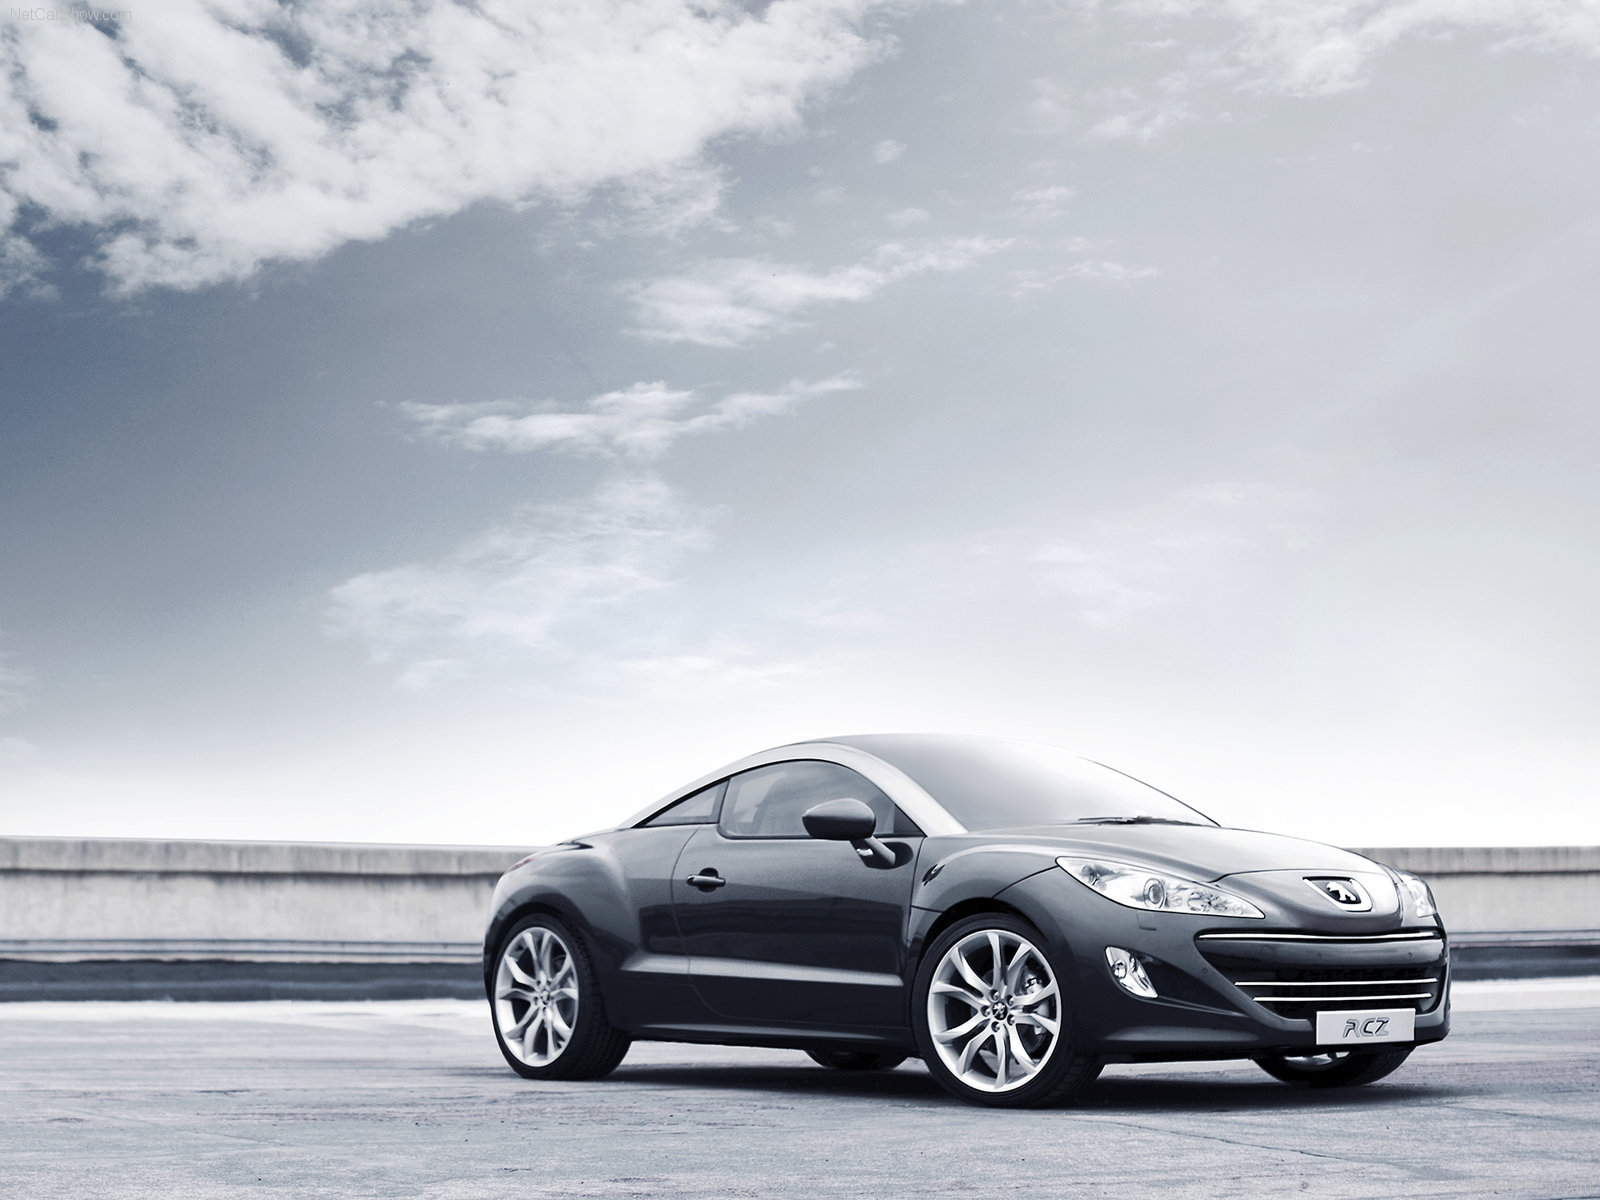 peugeot, transport, auto, gray High Definition image